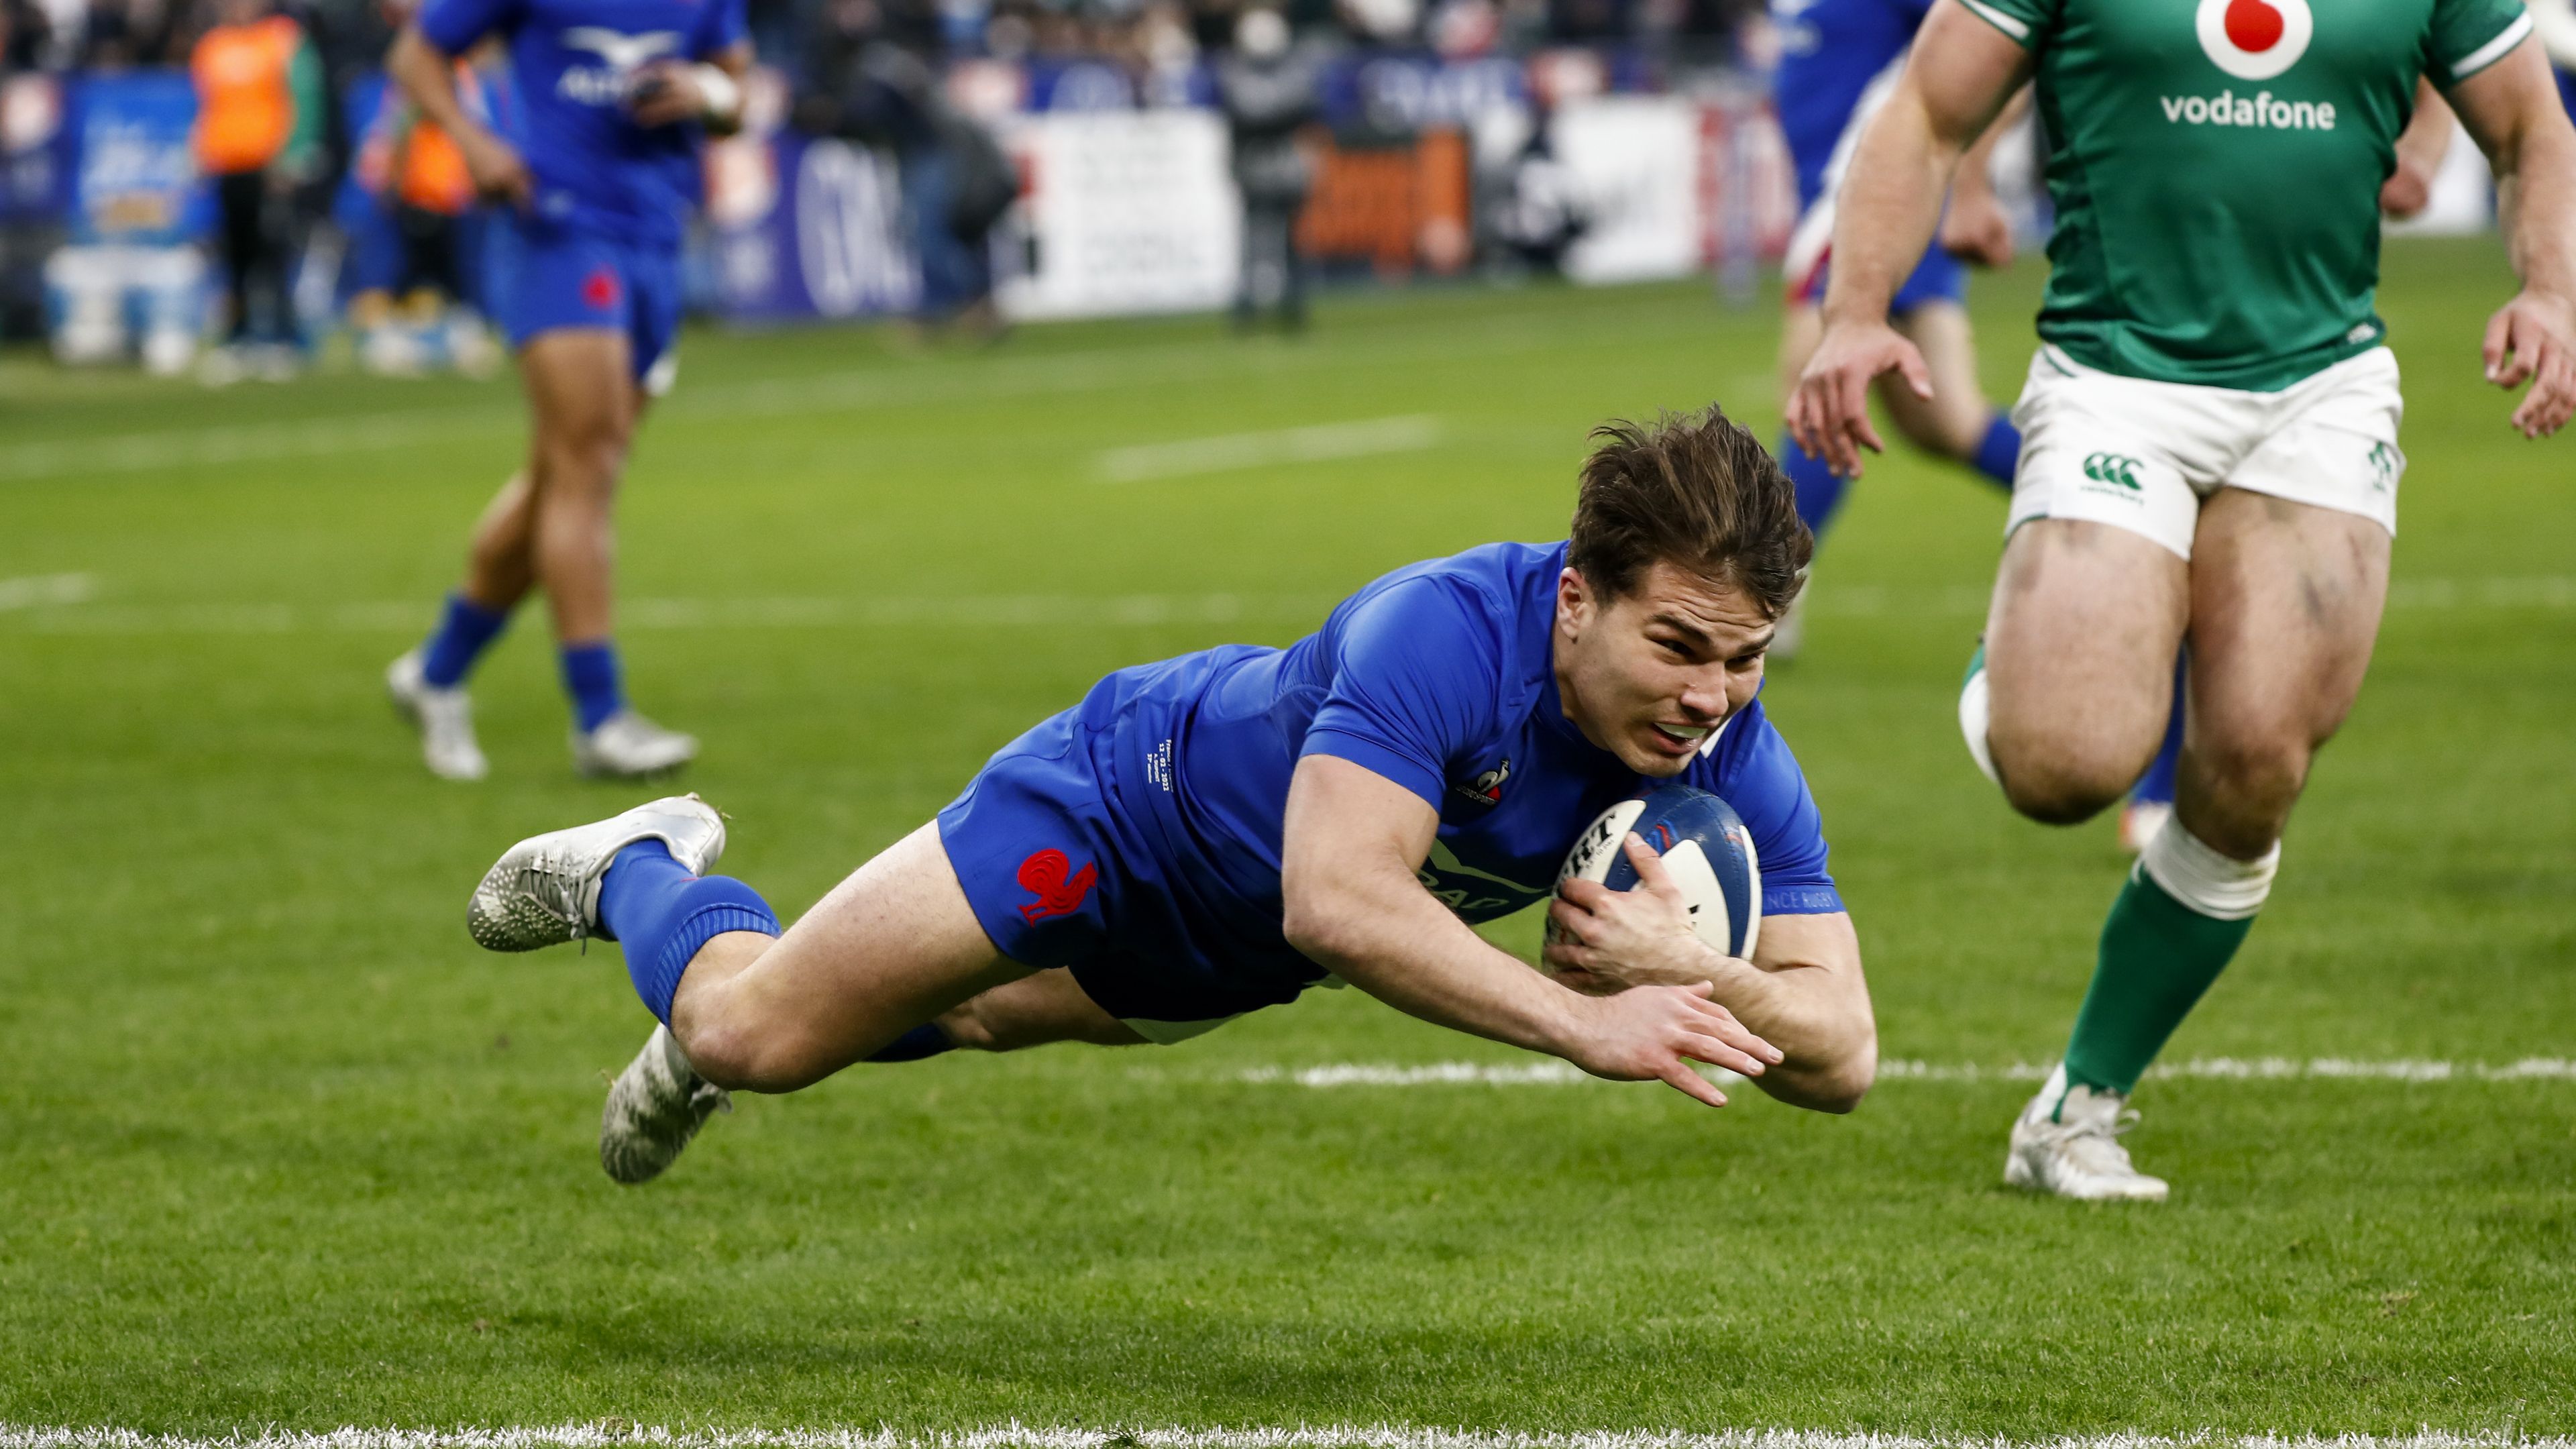 Antoine Dupont of France scores a try during the Six Nations match between France and Ireland at Stade de France.